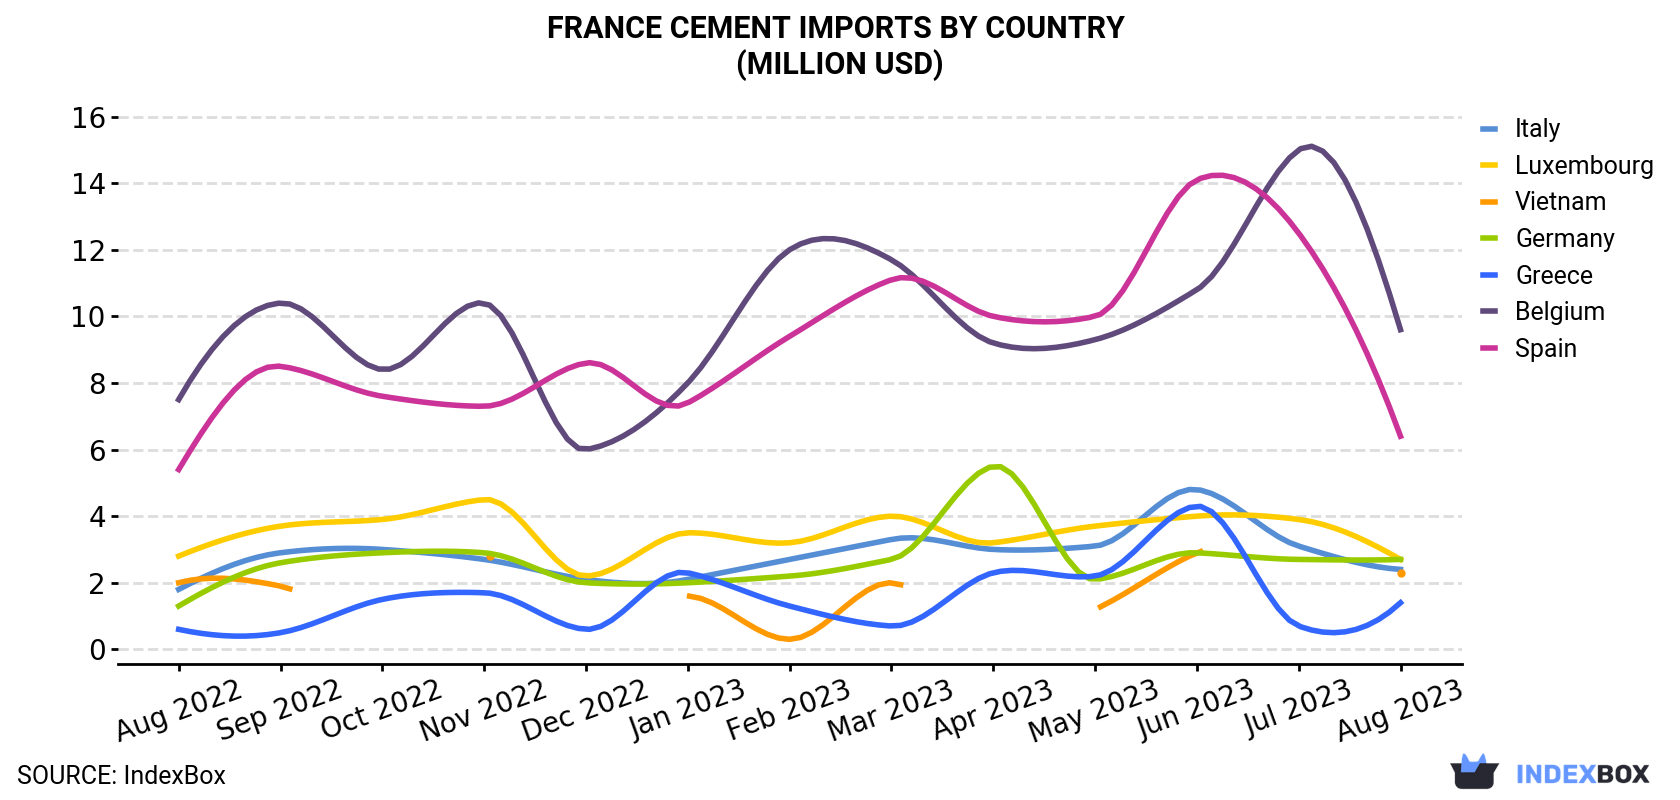 France Cement Imports By Country (Million USD)